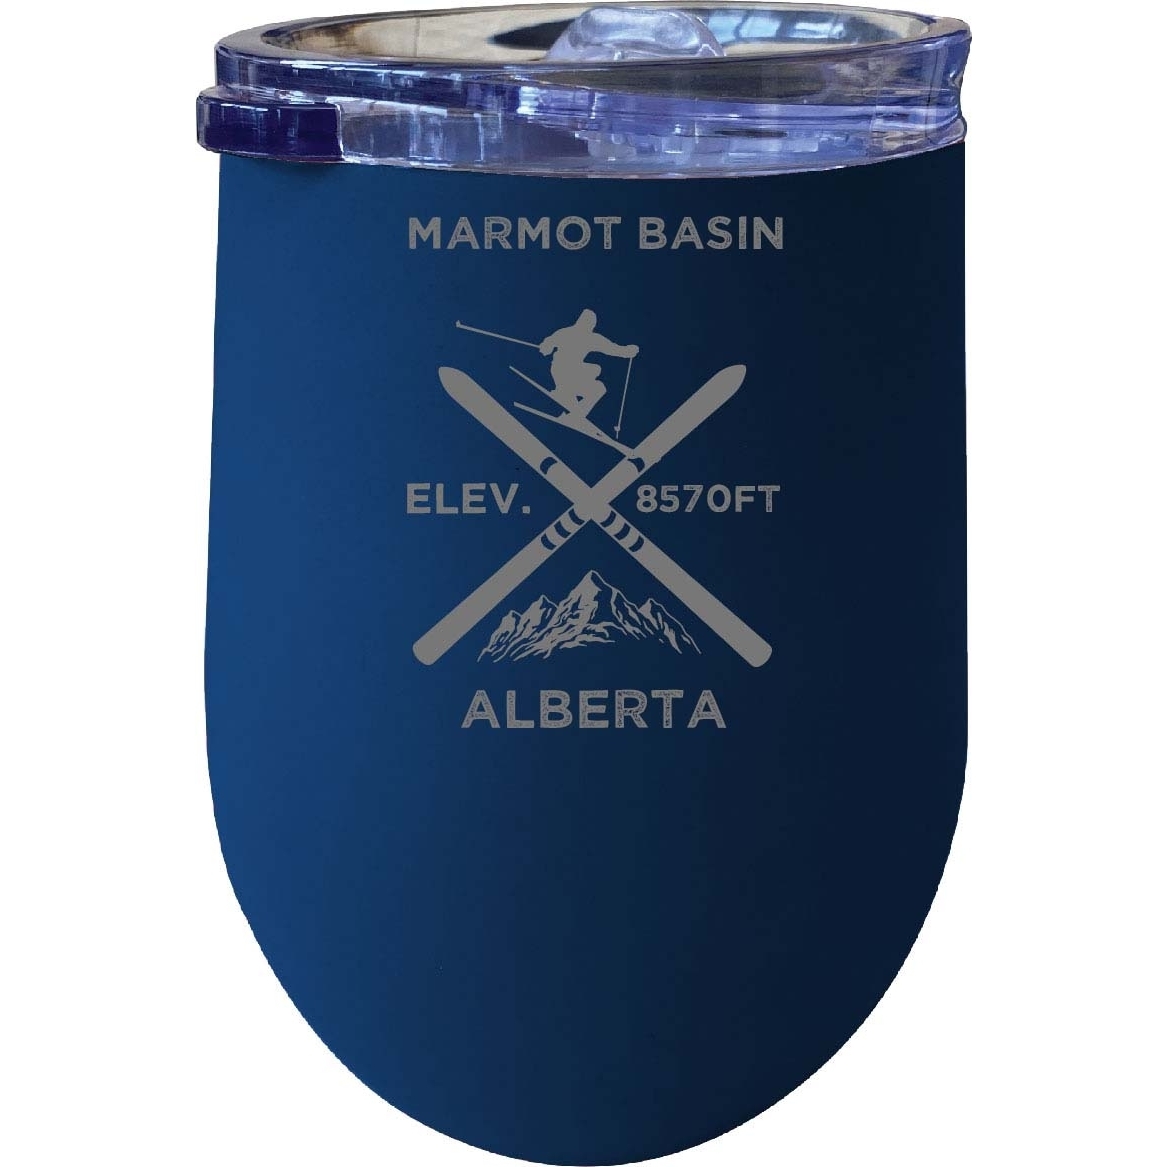 Marmot Basin Alberta Ski Souvenir 12 Oz Laser Etched Insulated Wine Stainless Steel Tumbler - Coral